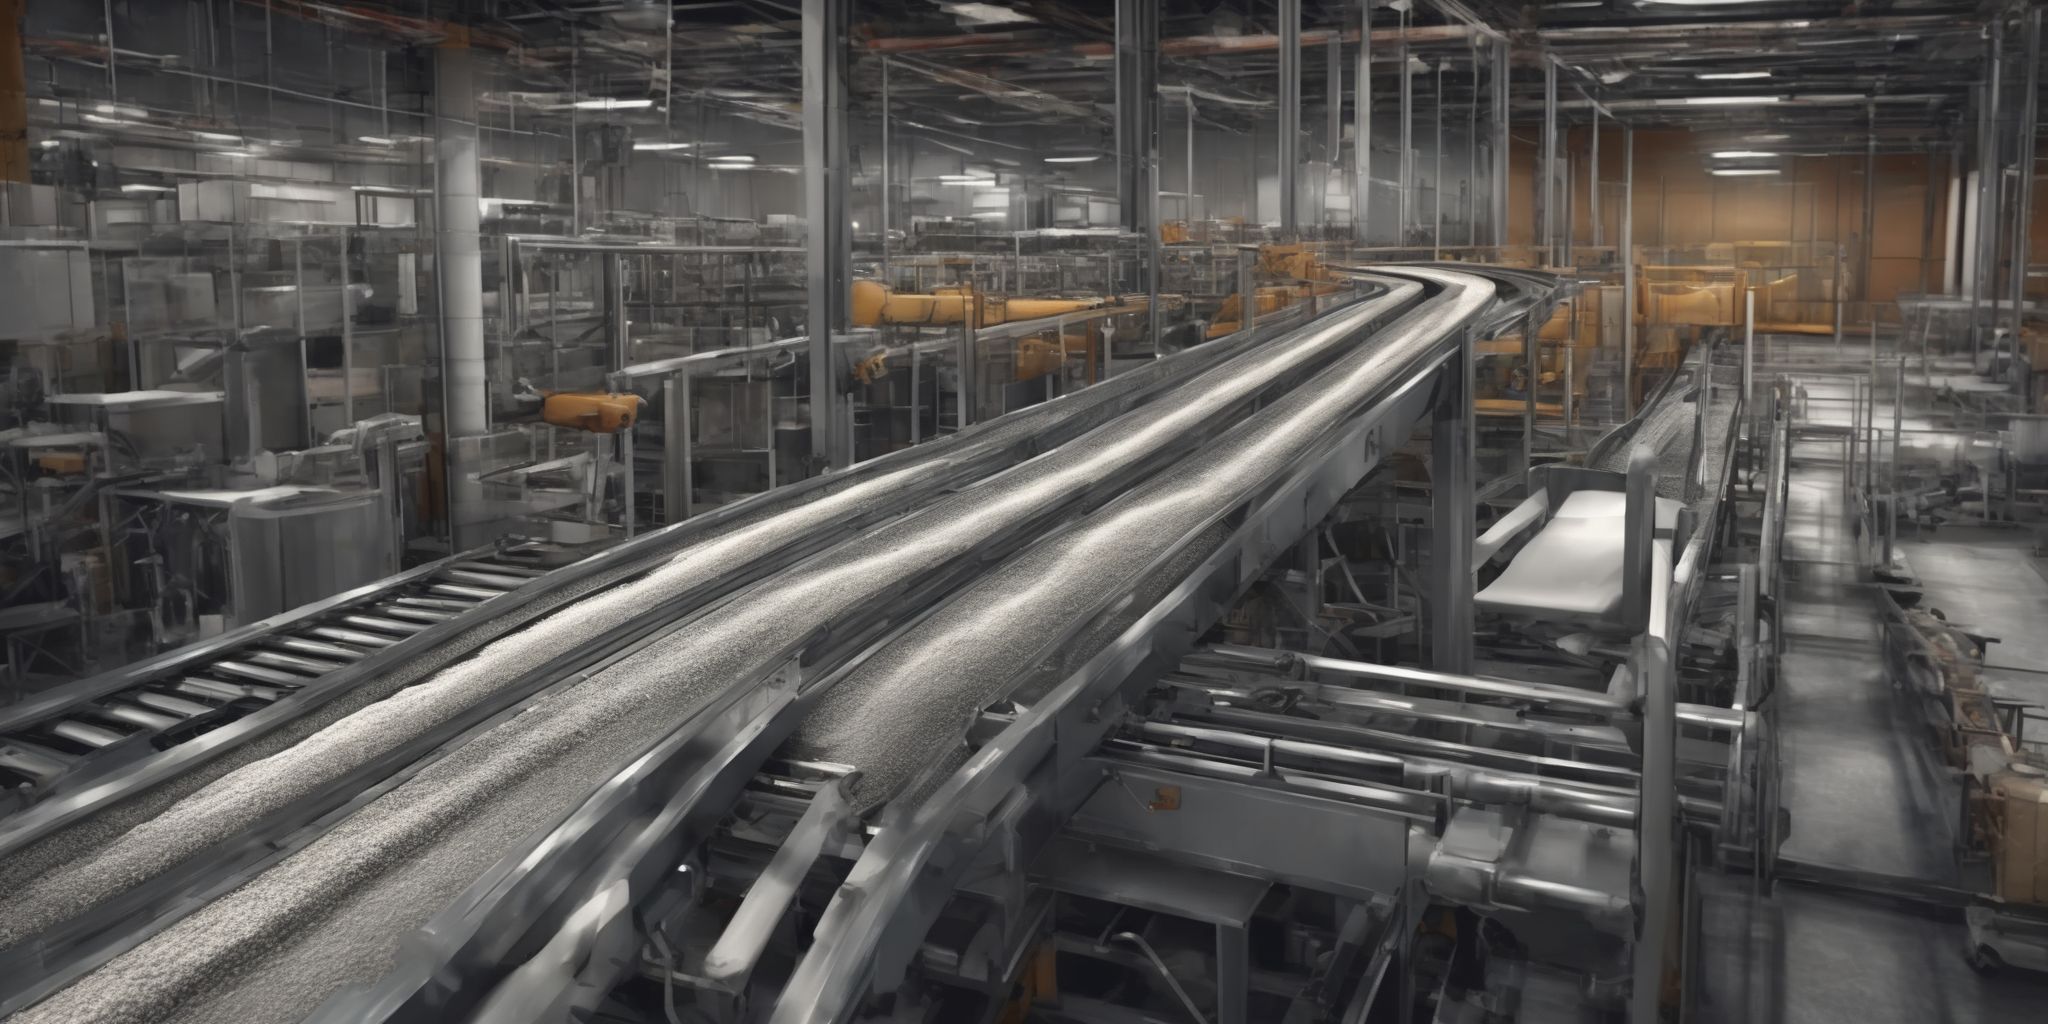 Conveyor  in realistic, photographic style